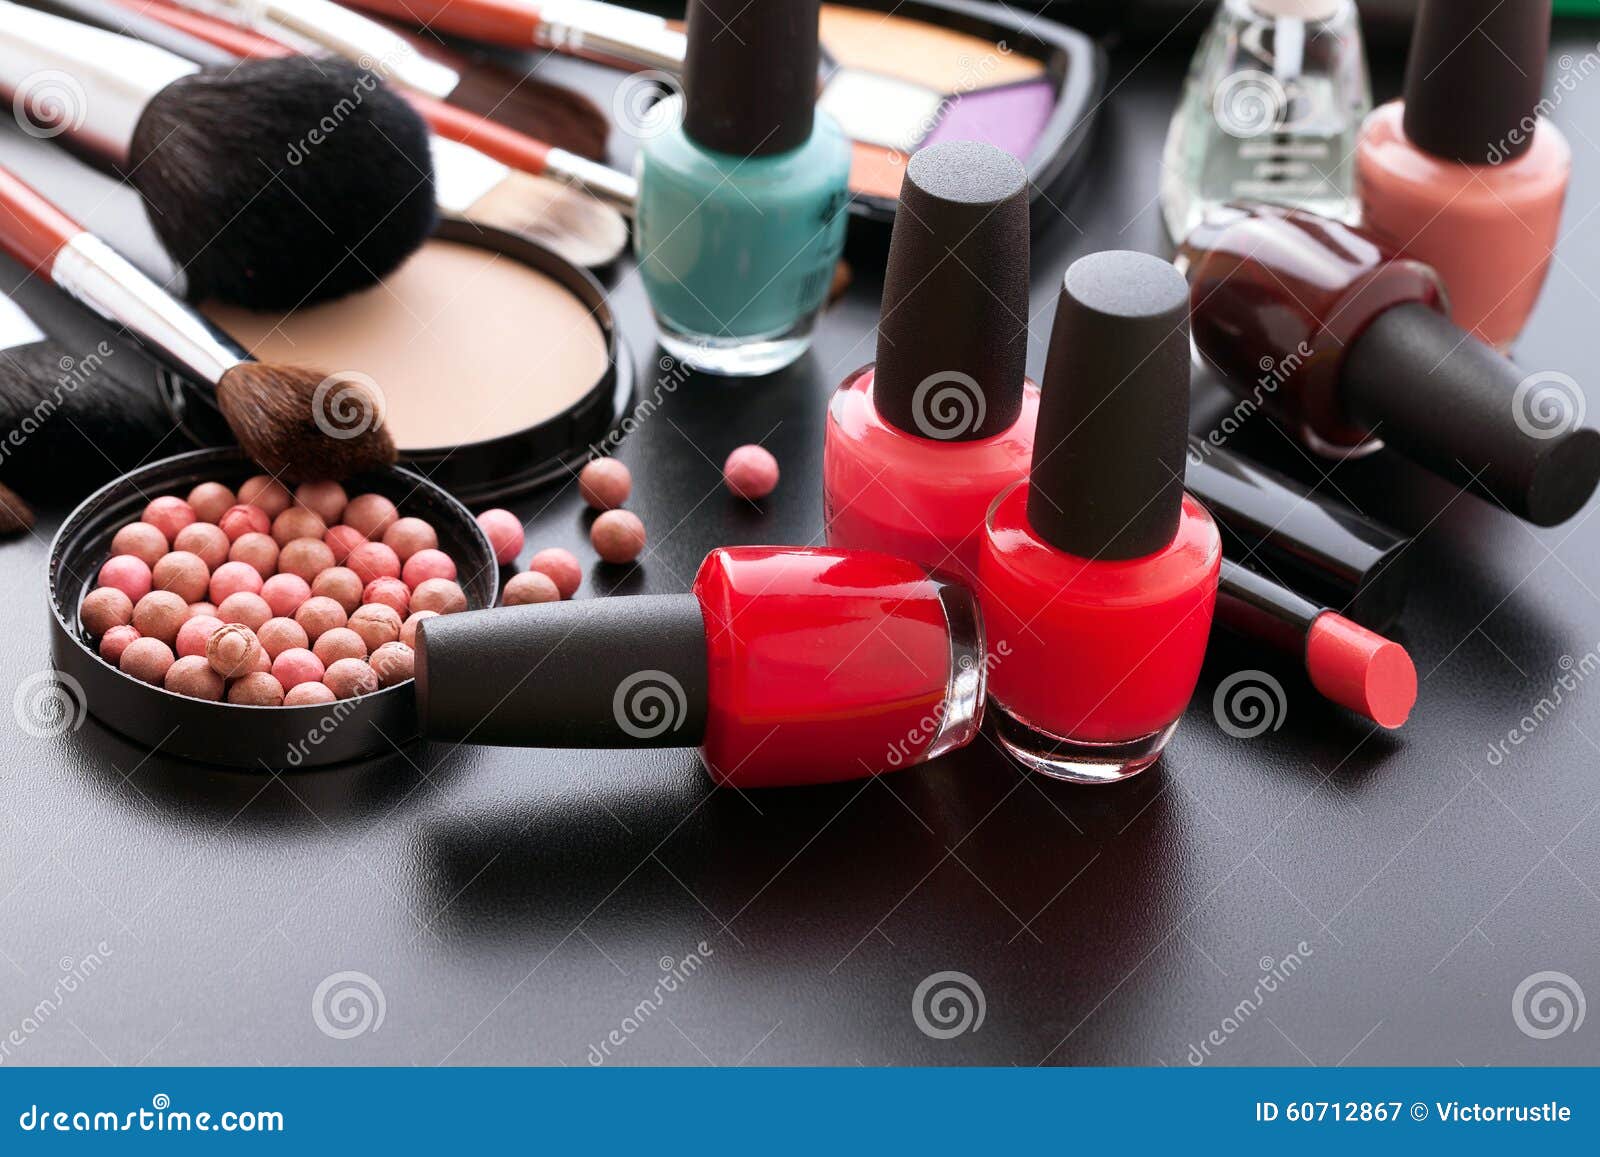 Cosmetics Make Up On Black Background Top View Stock Image Image